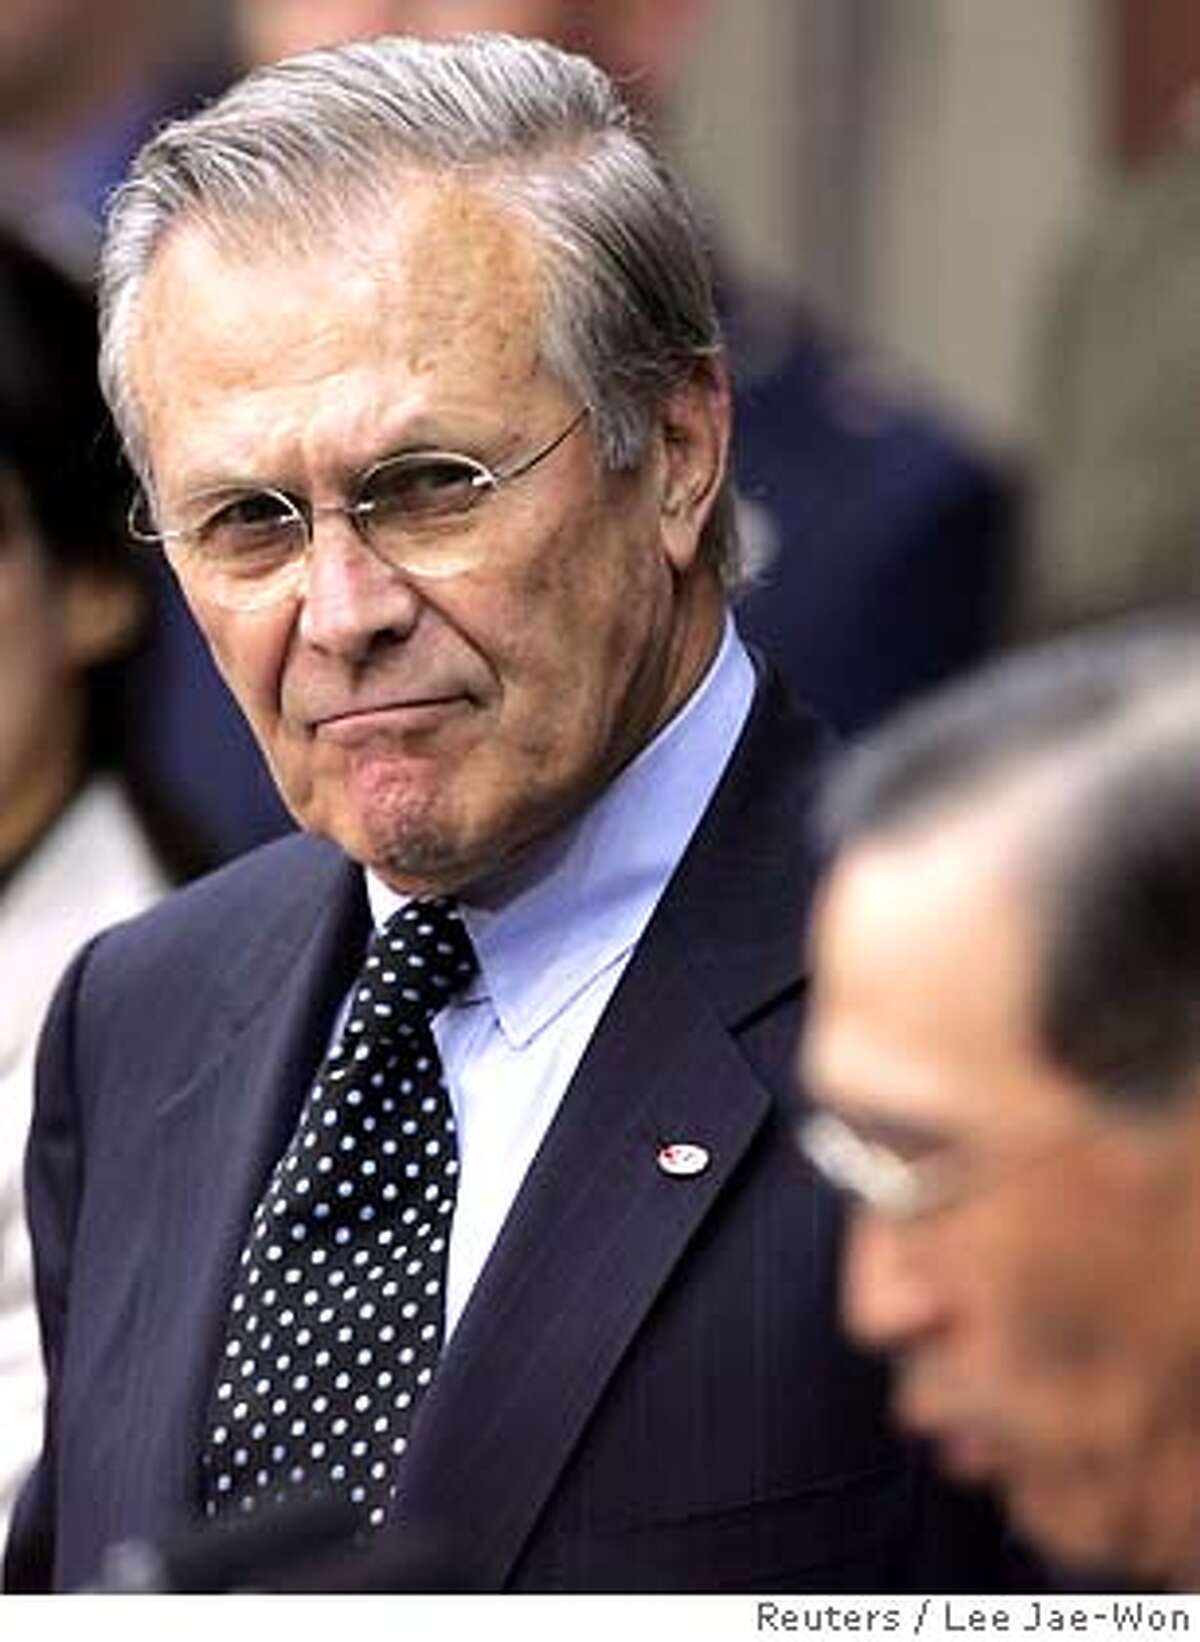 U.S. Defense Secretary Donald Rumsfeld (L) looks at his South Korean counterpart Yoon Kwang-ung during a news conference at Seoul's defence ministry headquarters October 21, 2005. South Korea can expect to take on more responsibility for defending itself but will not be able to take over wartime control from Washington just yet, Rumsfeld made clear on Friday. REUTERS/Lee Jae-Won 0